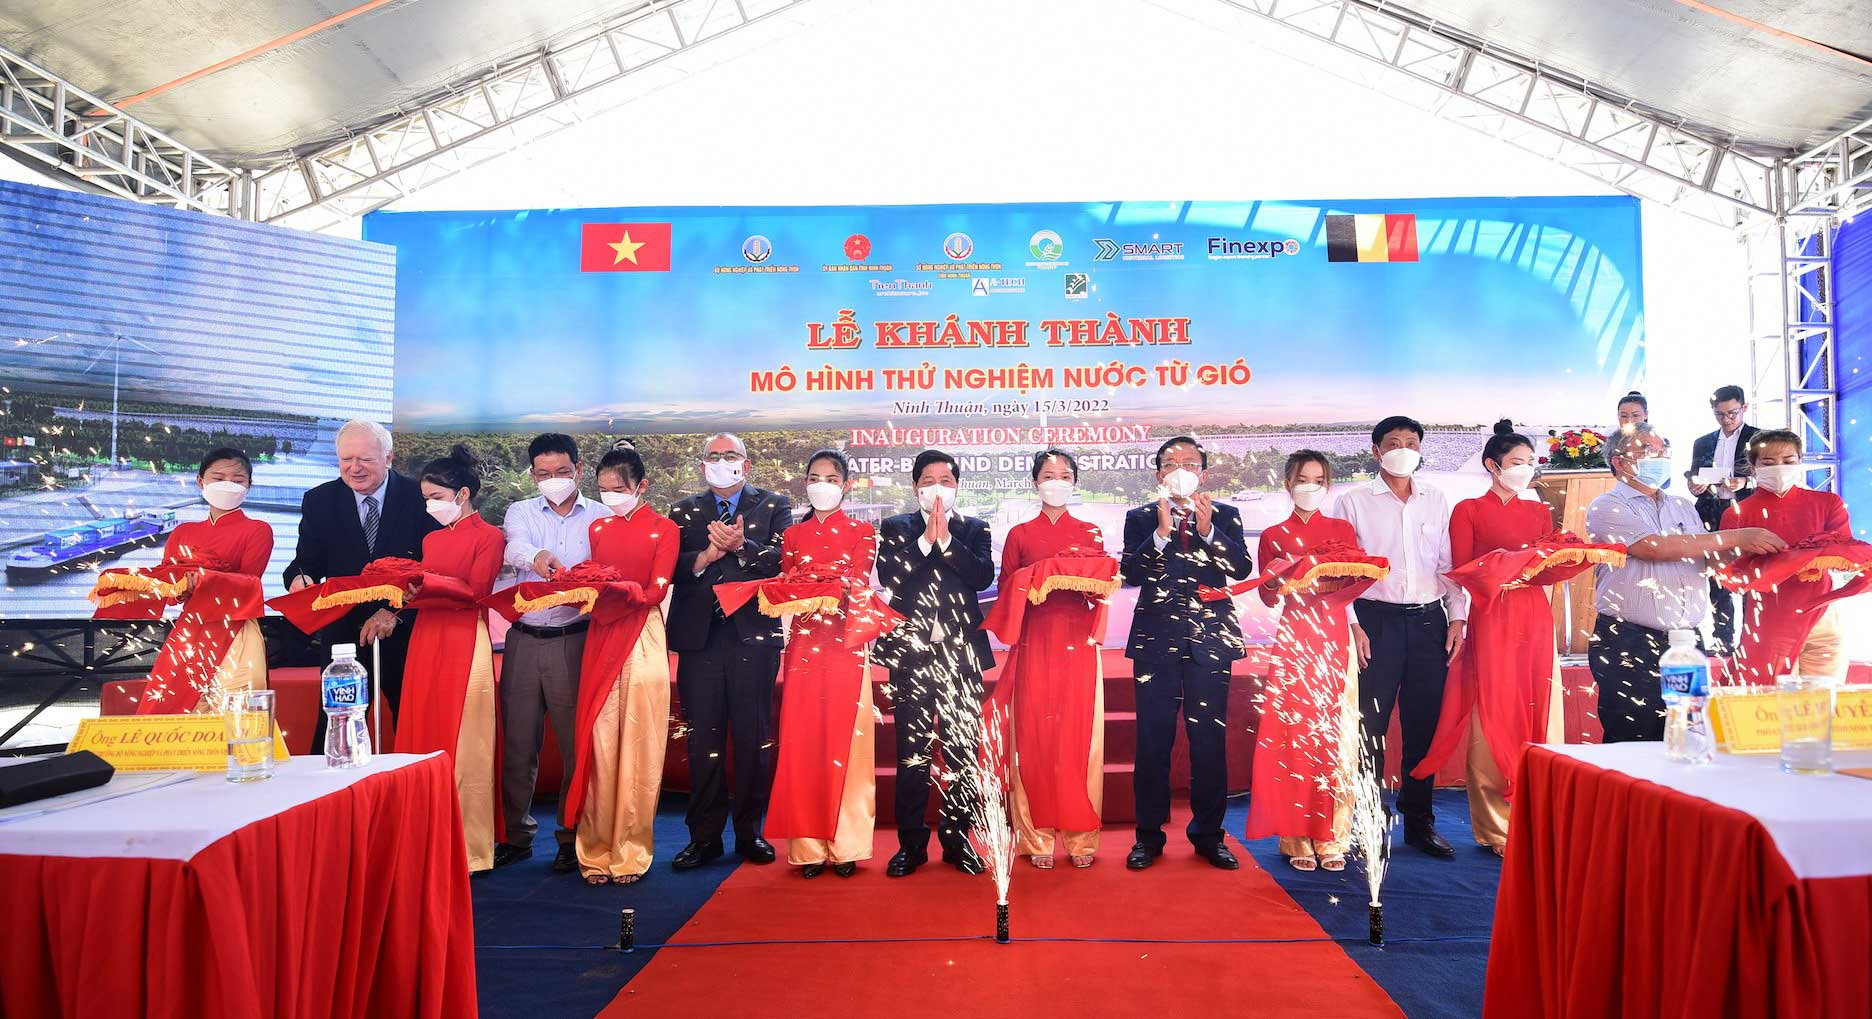 The inauguration took place on March 15 and welcomes representatives of MARD and Ninh Thuan province, Belgian Ambassador to Vietnam, SUL and other international organisations.